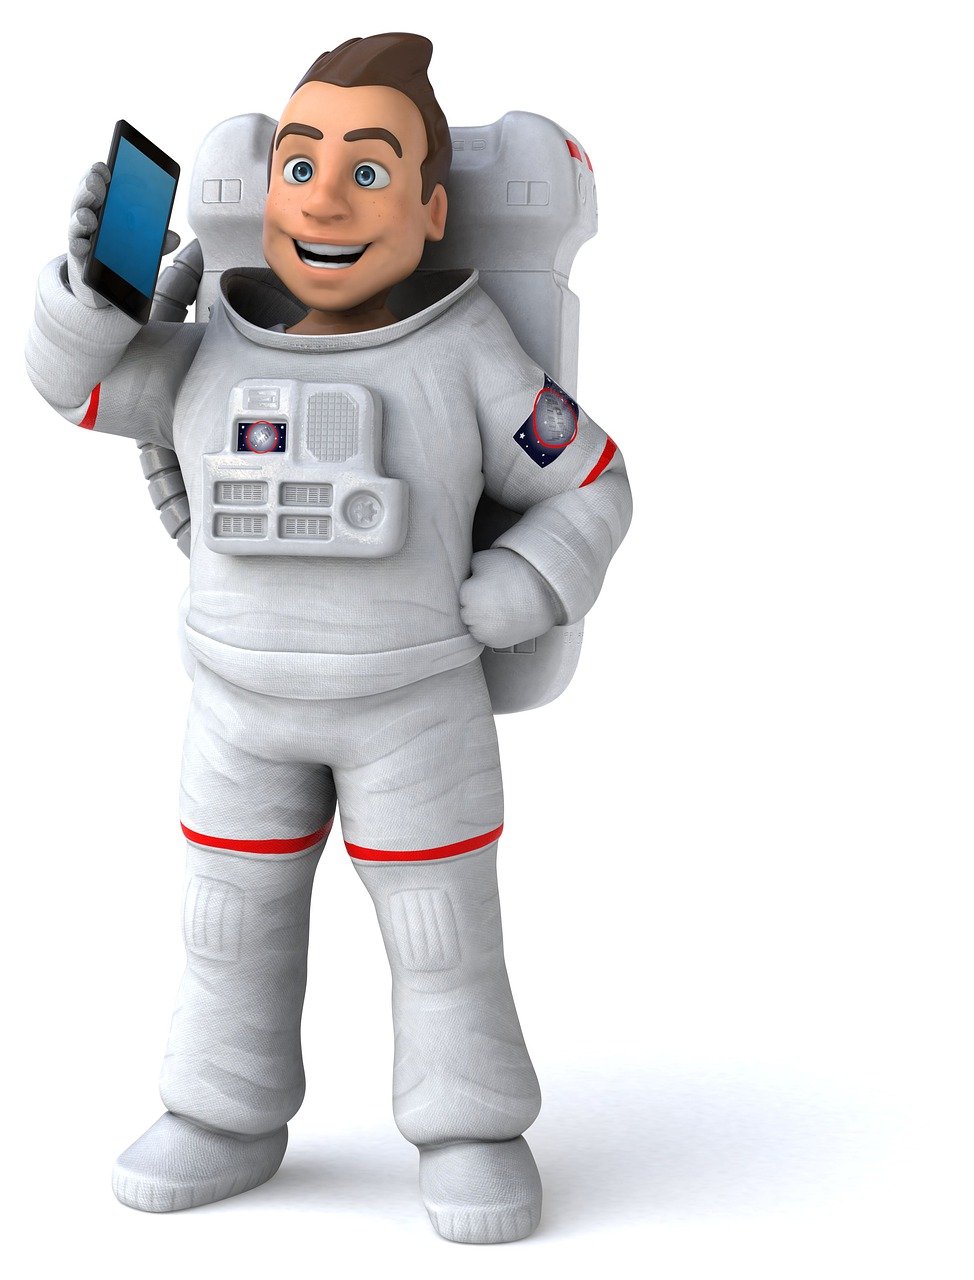 a man in a space suit holding a cell phone, a stock photo, inspired by Scott Listfield, shutterstock, toon render keyshot, florida man, matt white color armor, stock photo